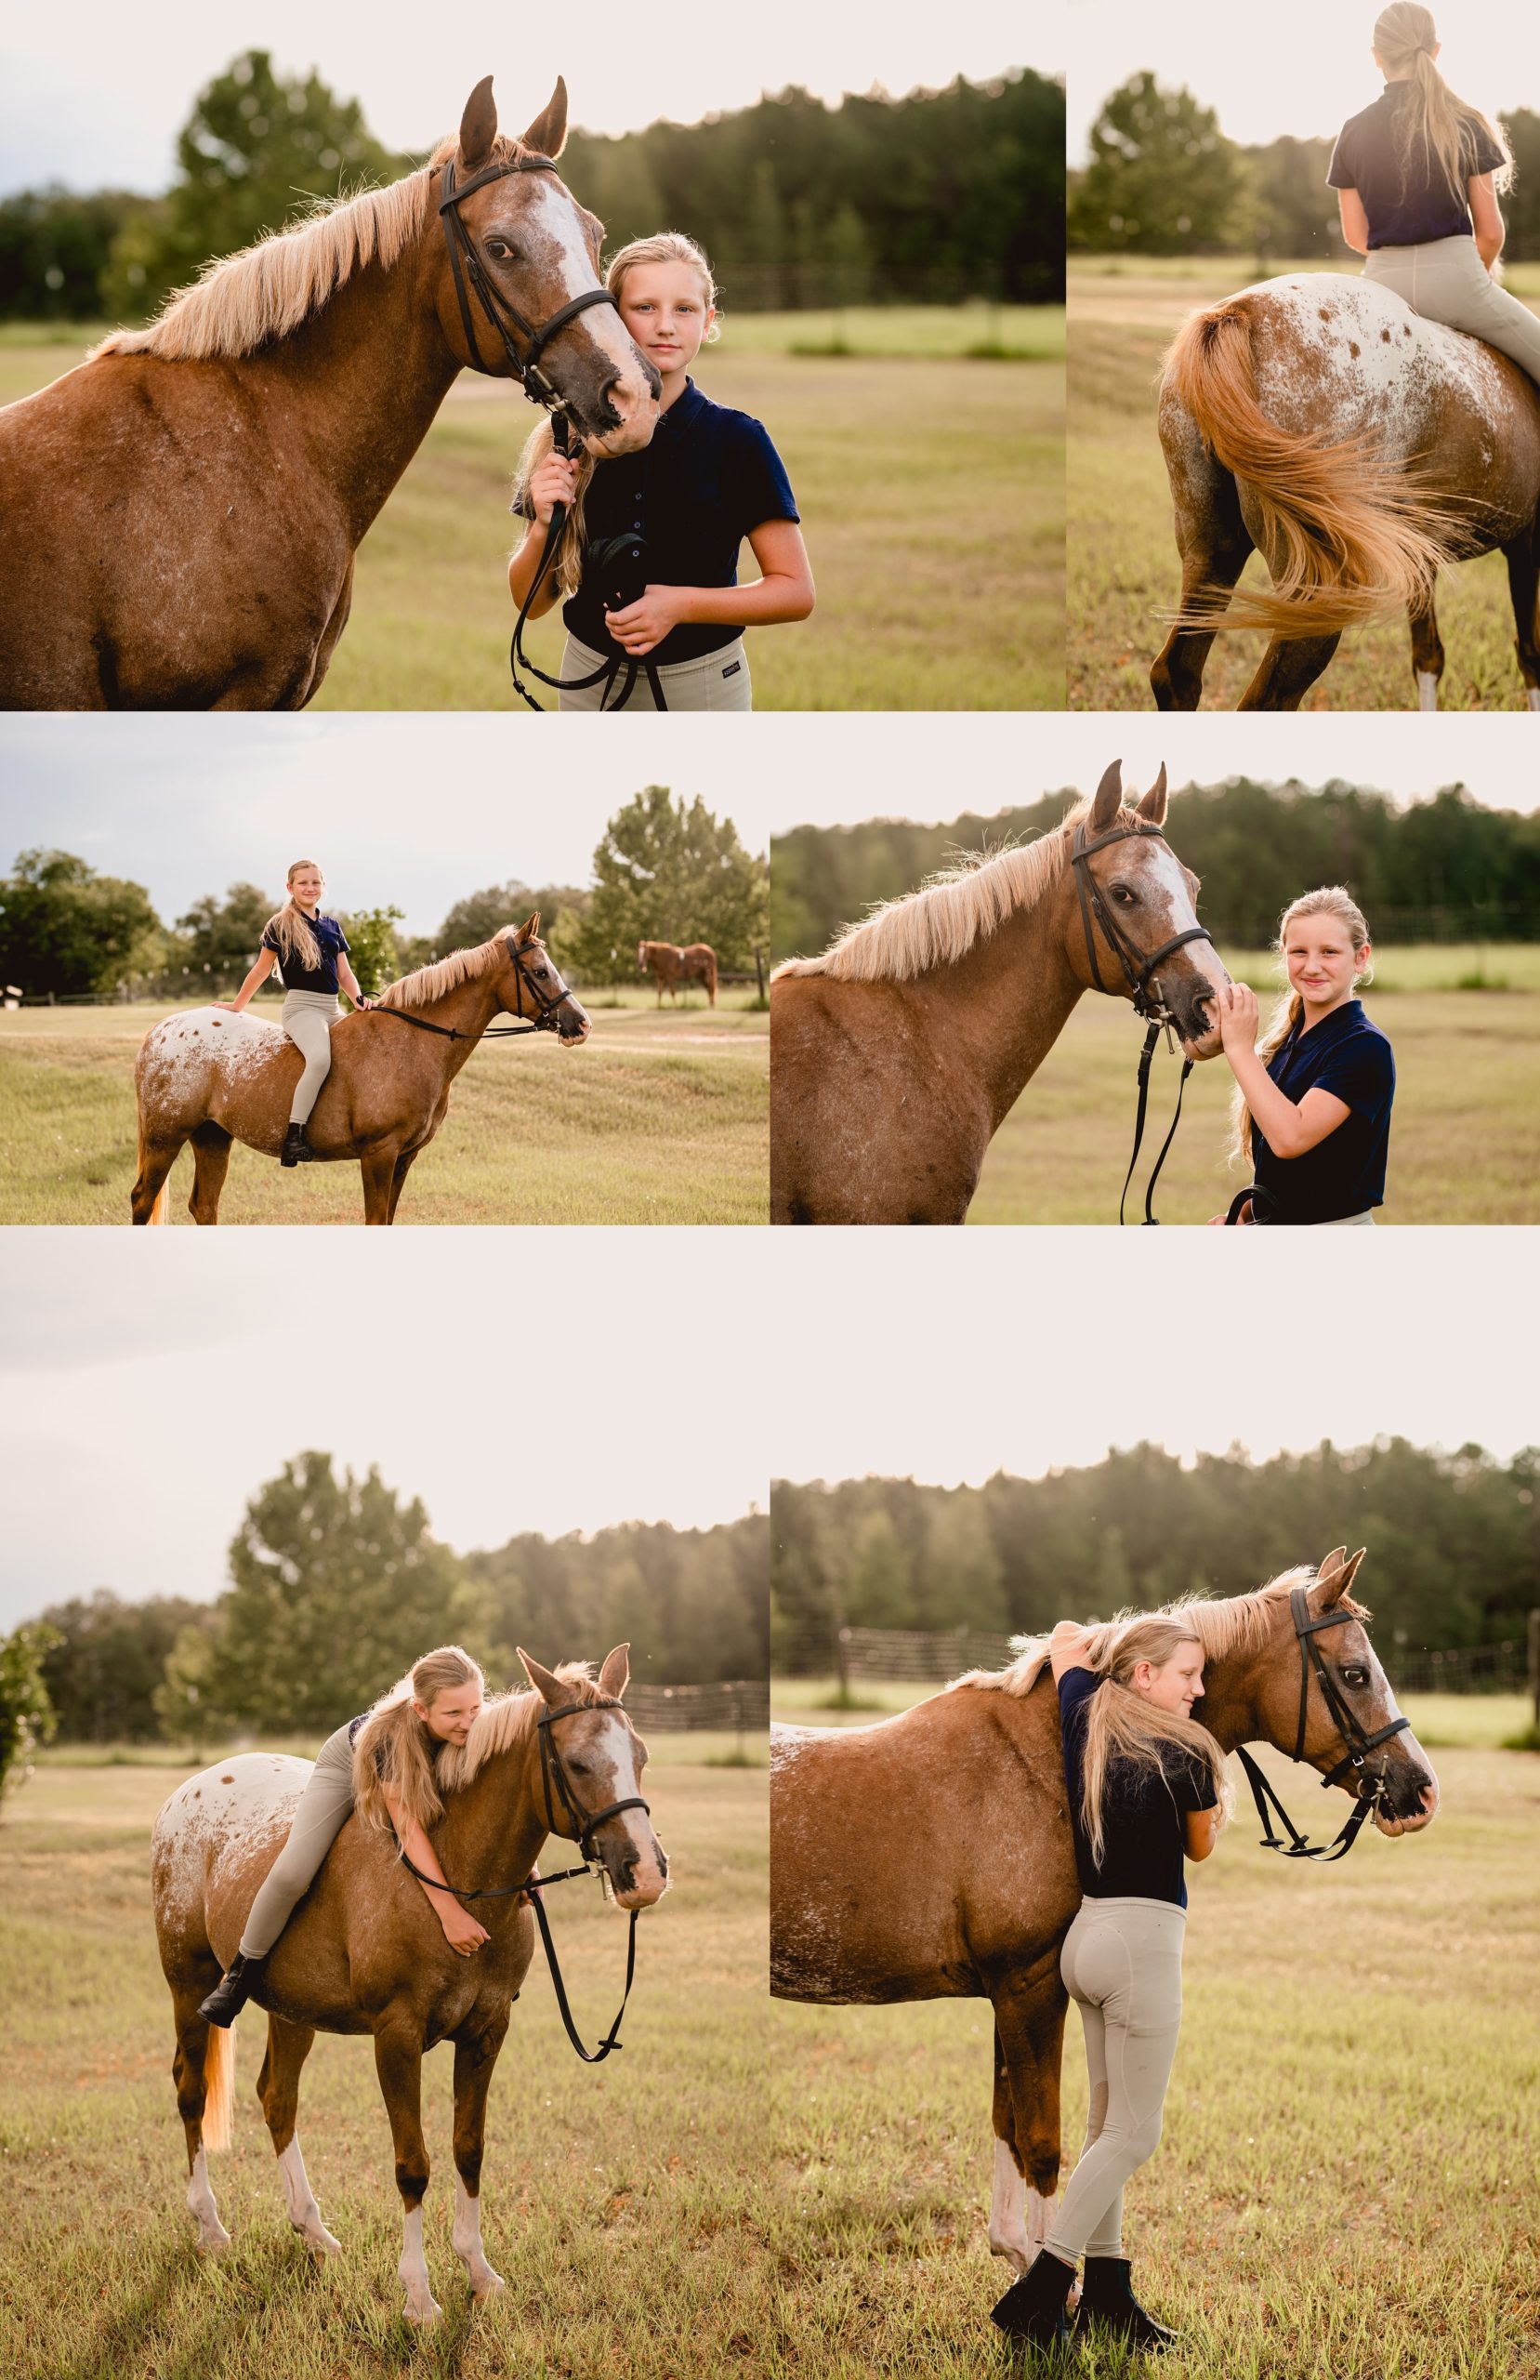 A girl with her POA in north florida takes cute, sentimental photos with her pony.